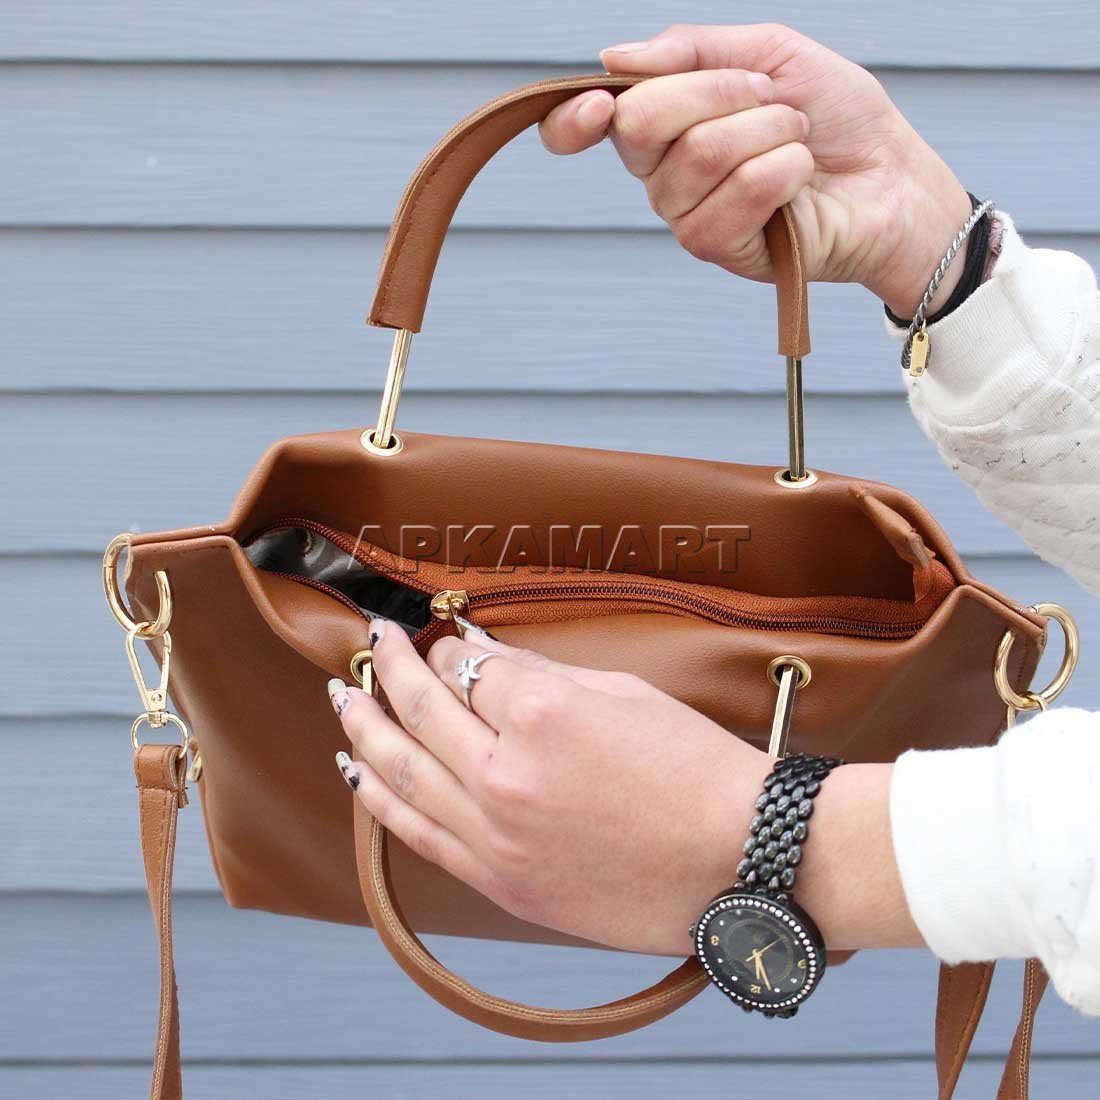 6 types of bags every girl should own